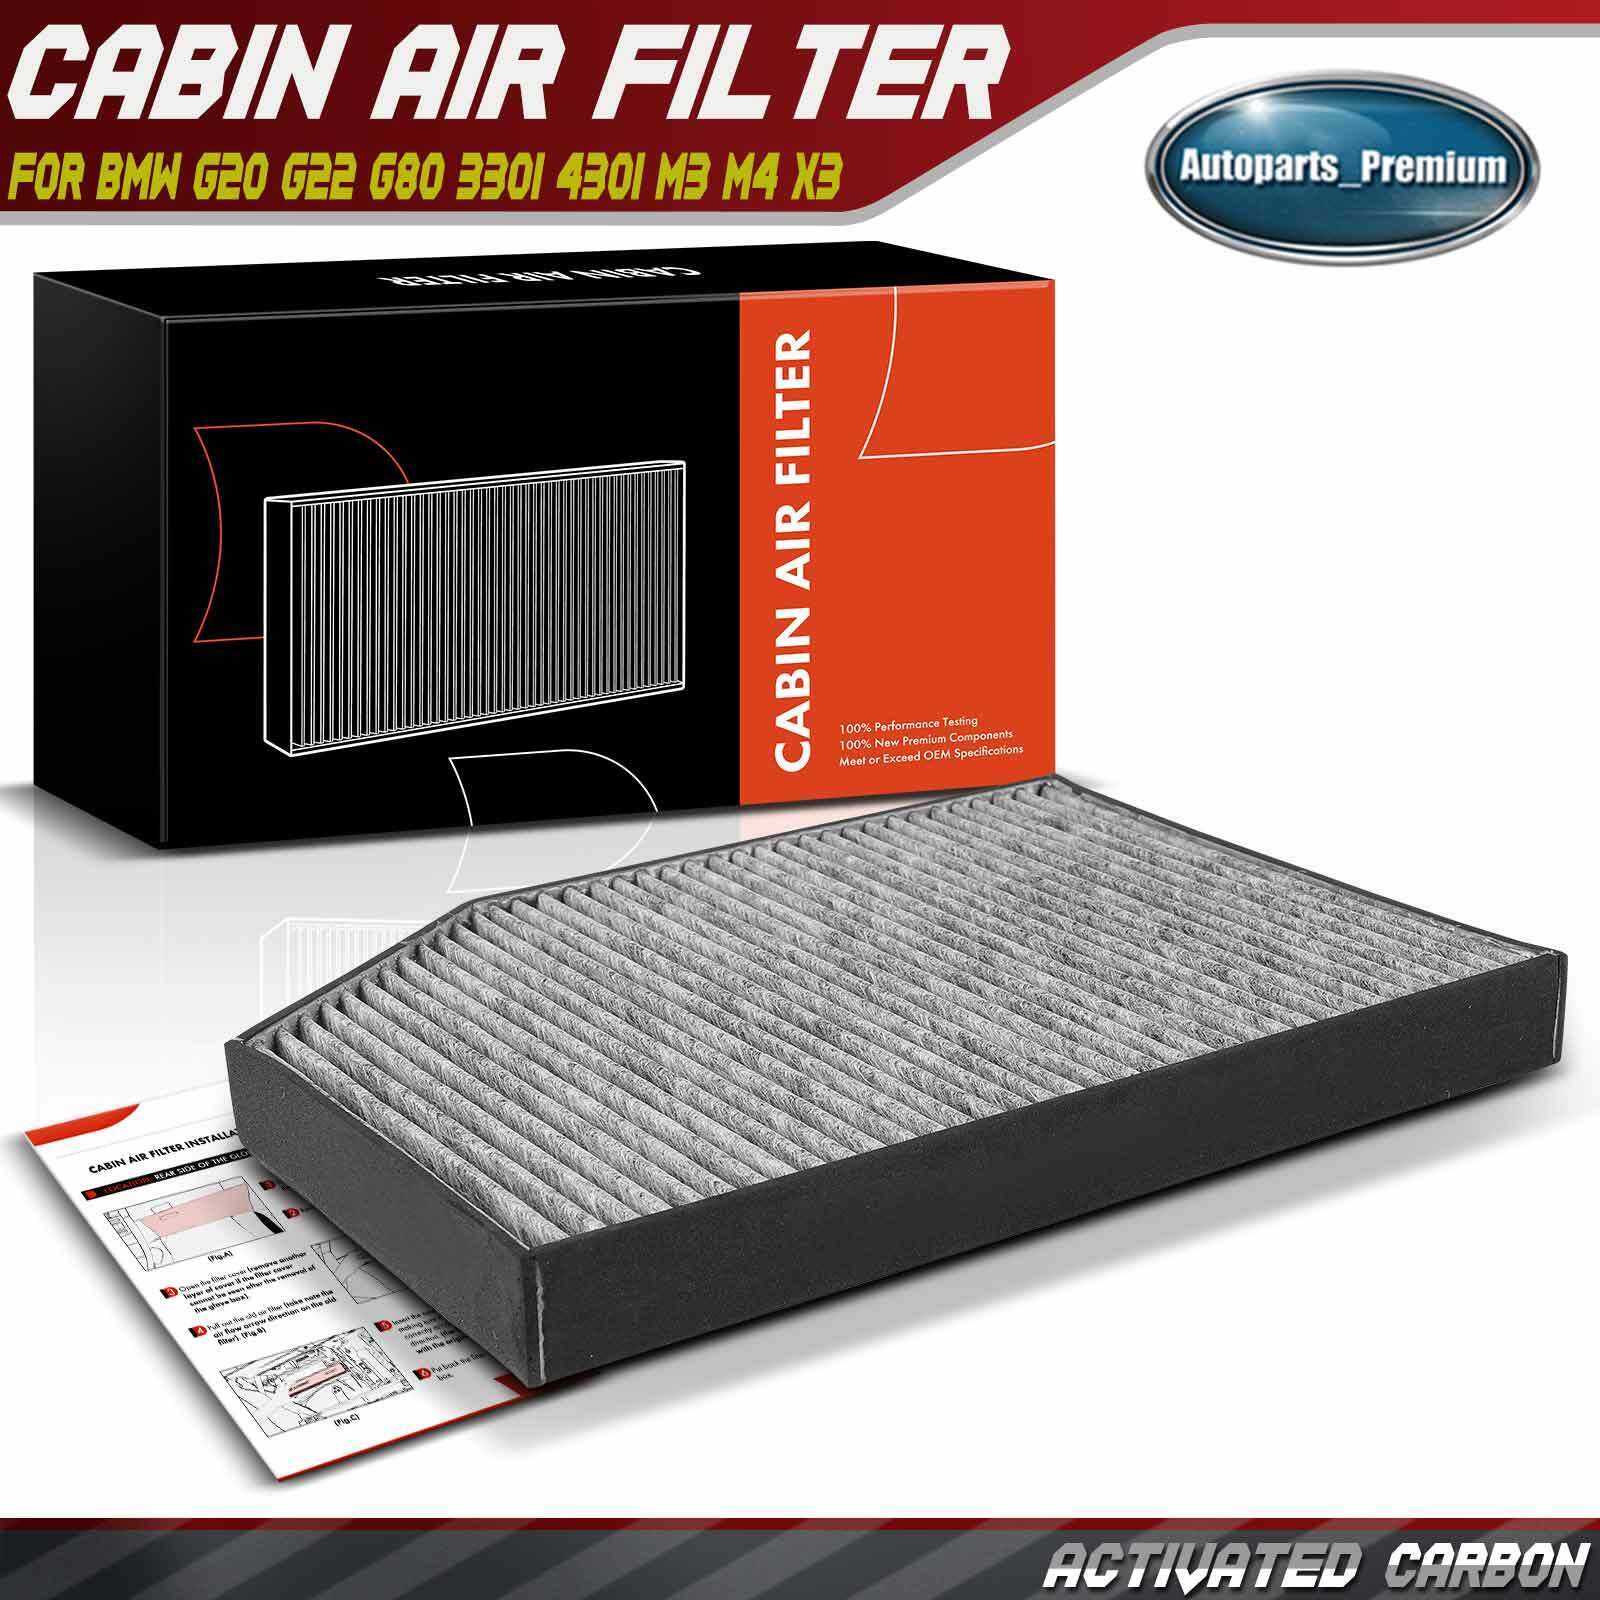 Activated Carbon Cabin Air Filter for BMW G20 G22 F87 G80 330i 430i M3 M4 X3 X4